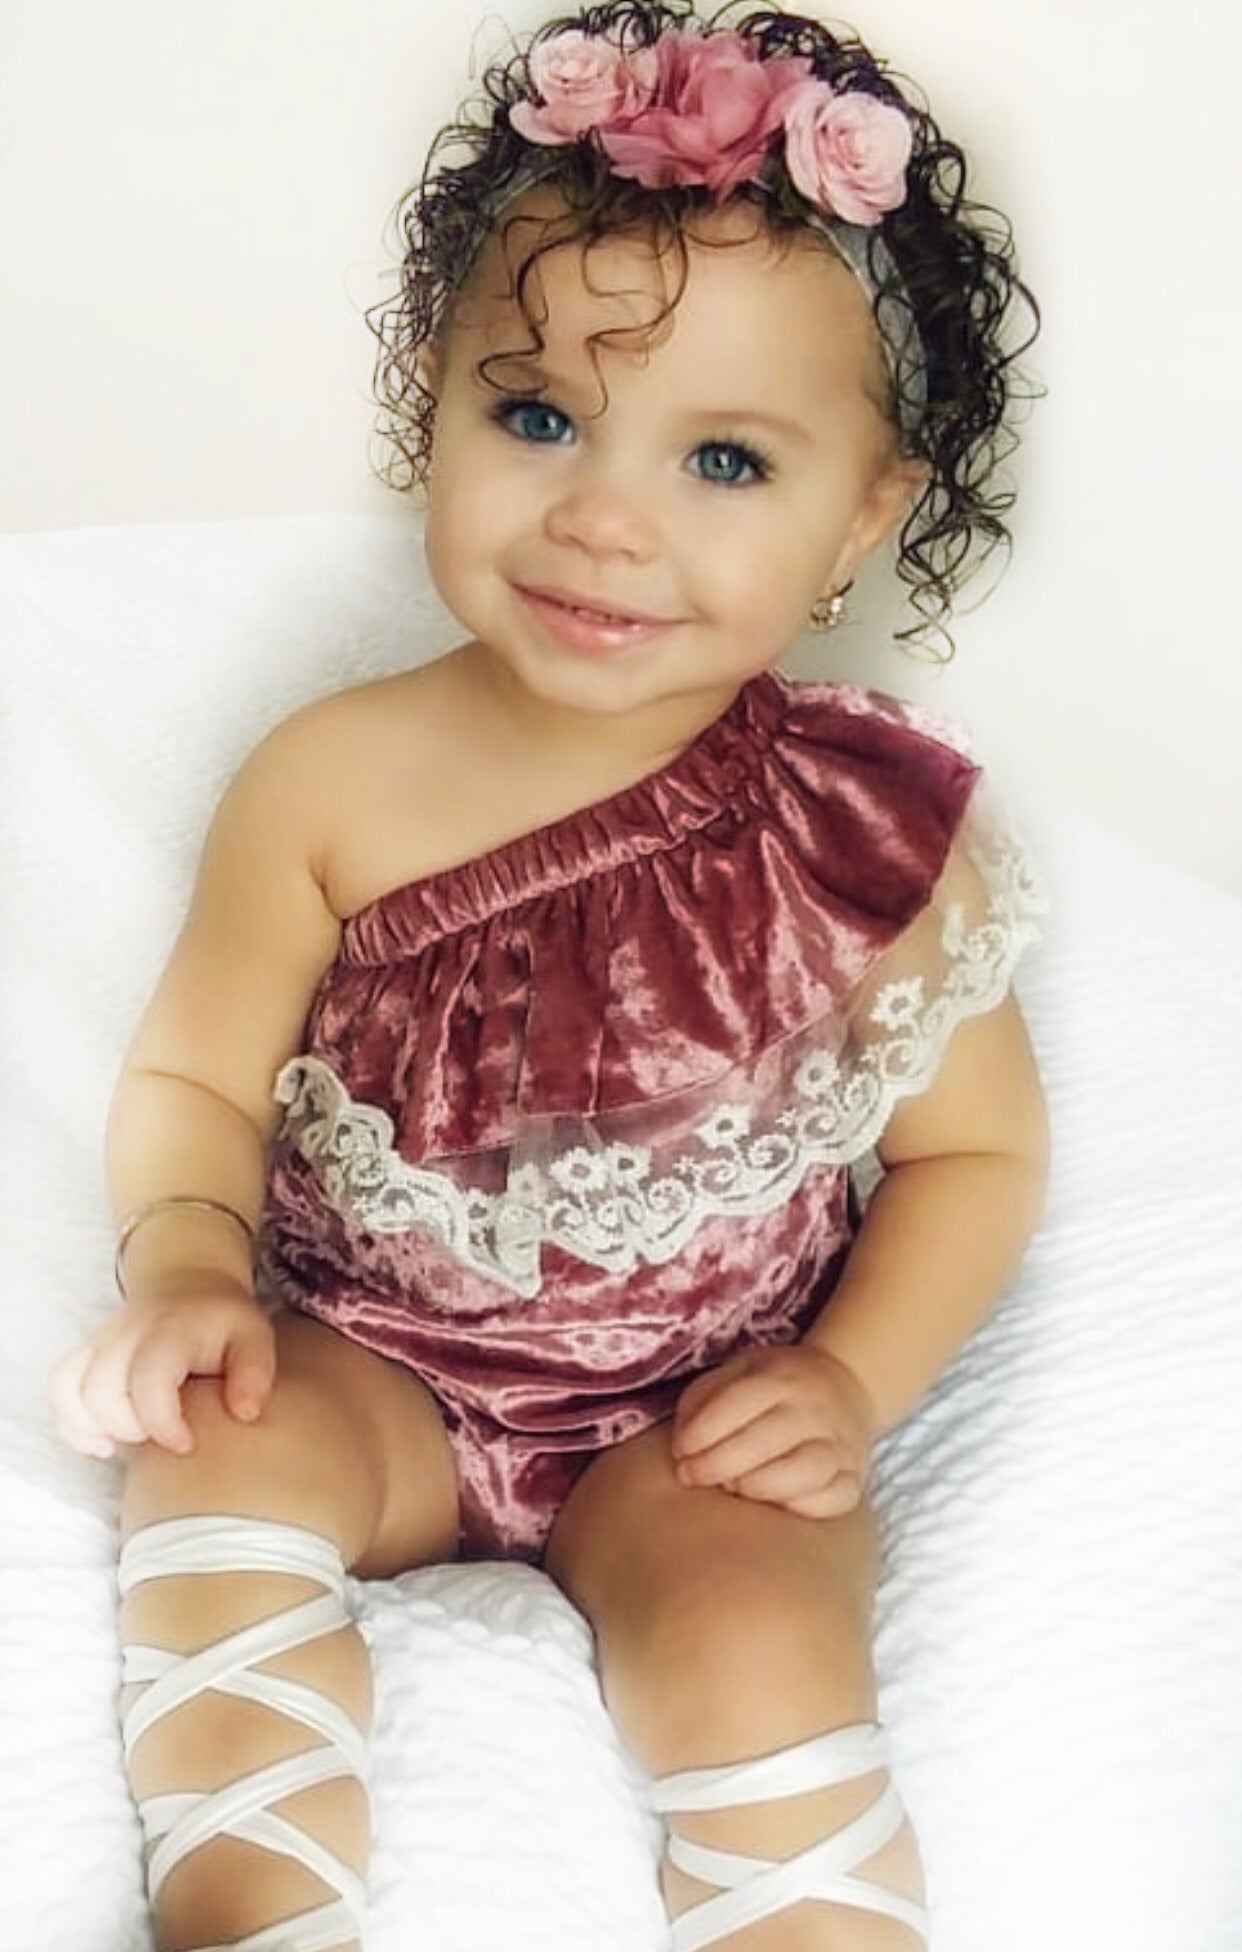 Kryssi Kouture Exclusive "Isn't She Lovely" ® Baby Girls Dusty Rose Velvet and Lace Off the Shoulder Bodysuit Romper, Romper - Ruffles & Bowties Bowtique